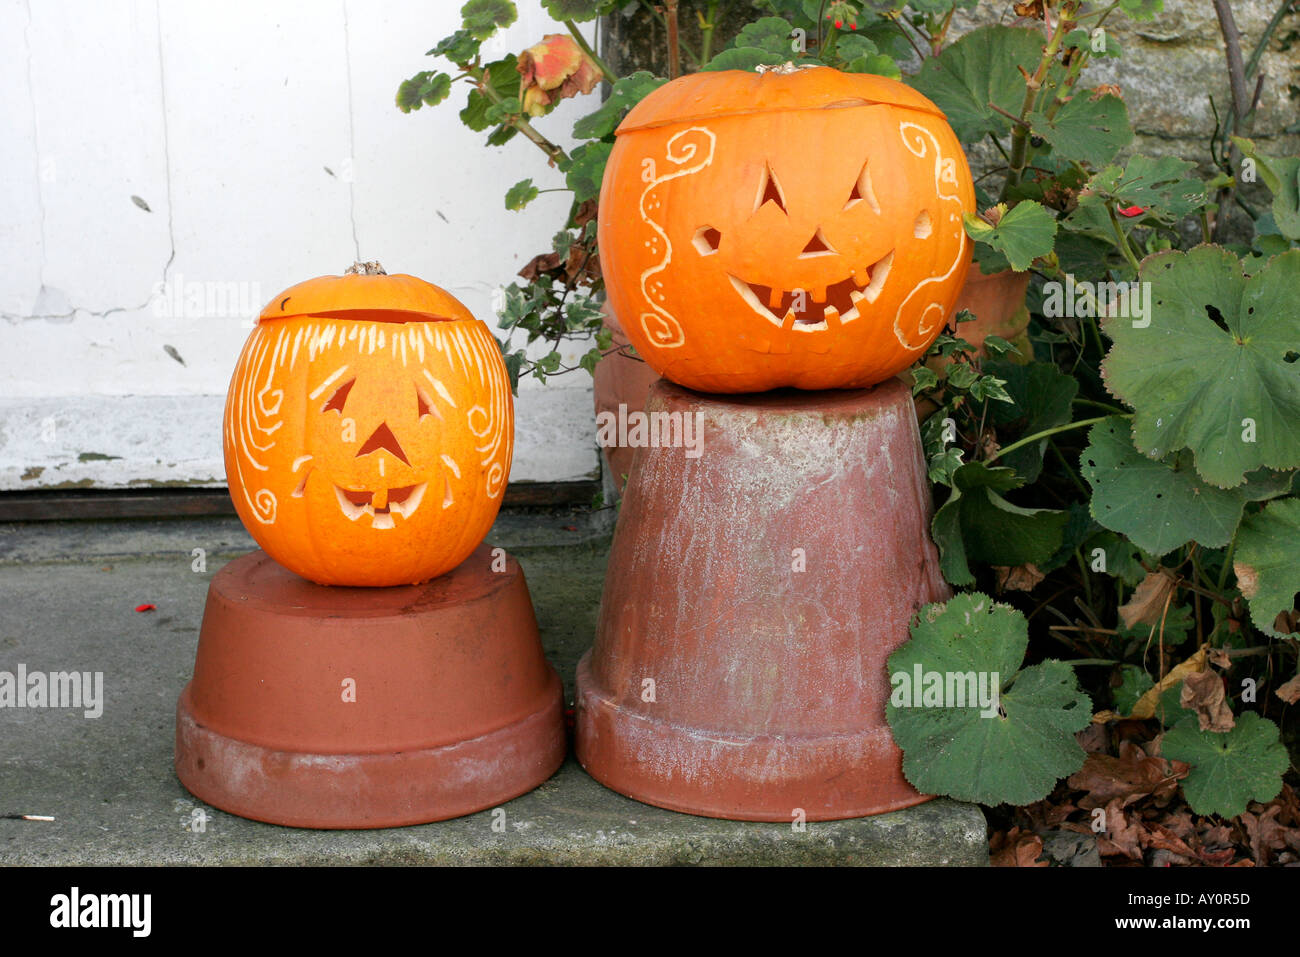 Comical faces carved on a pair of Halloween pumpkins Stock Photo